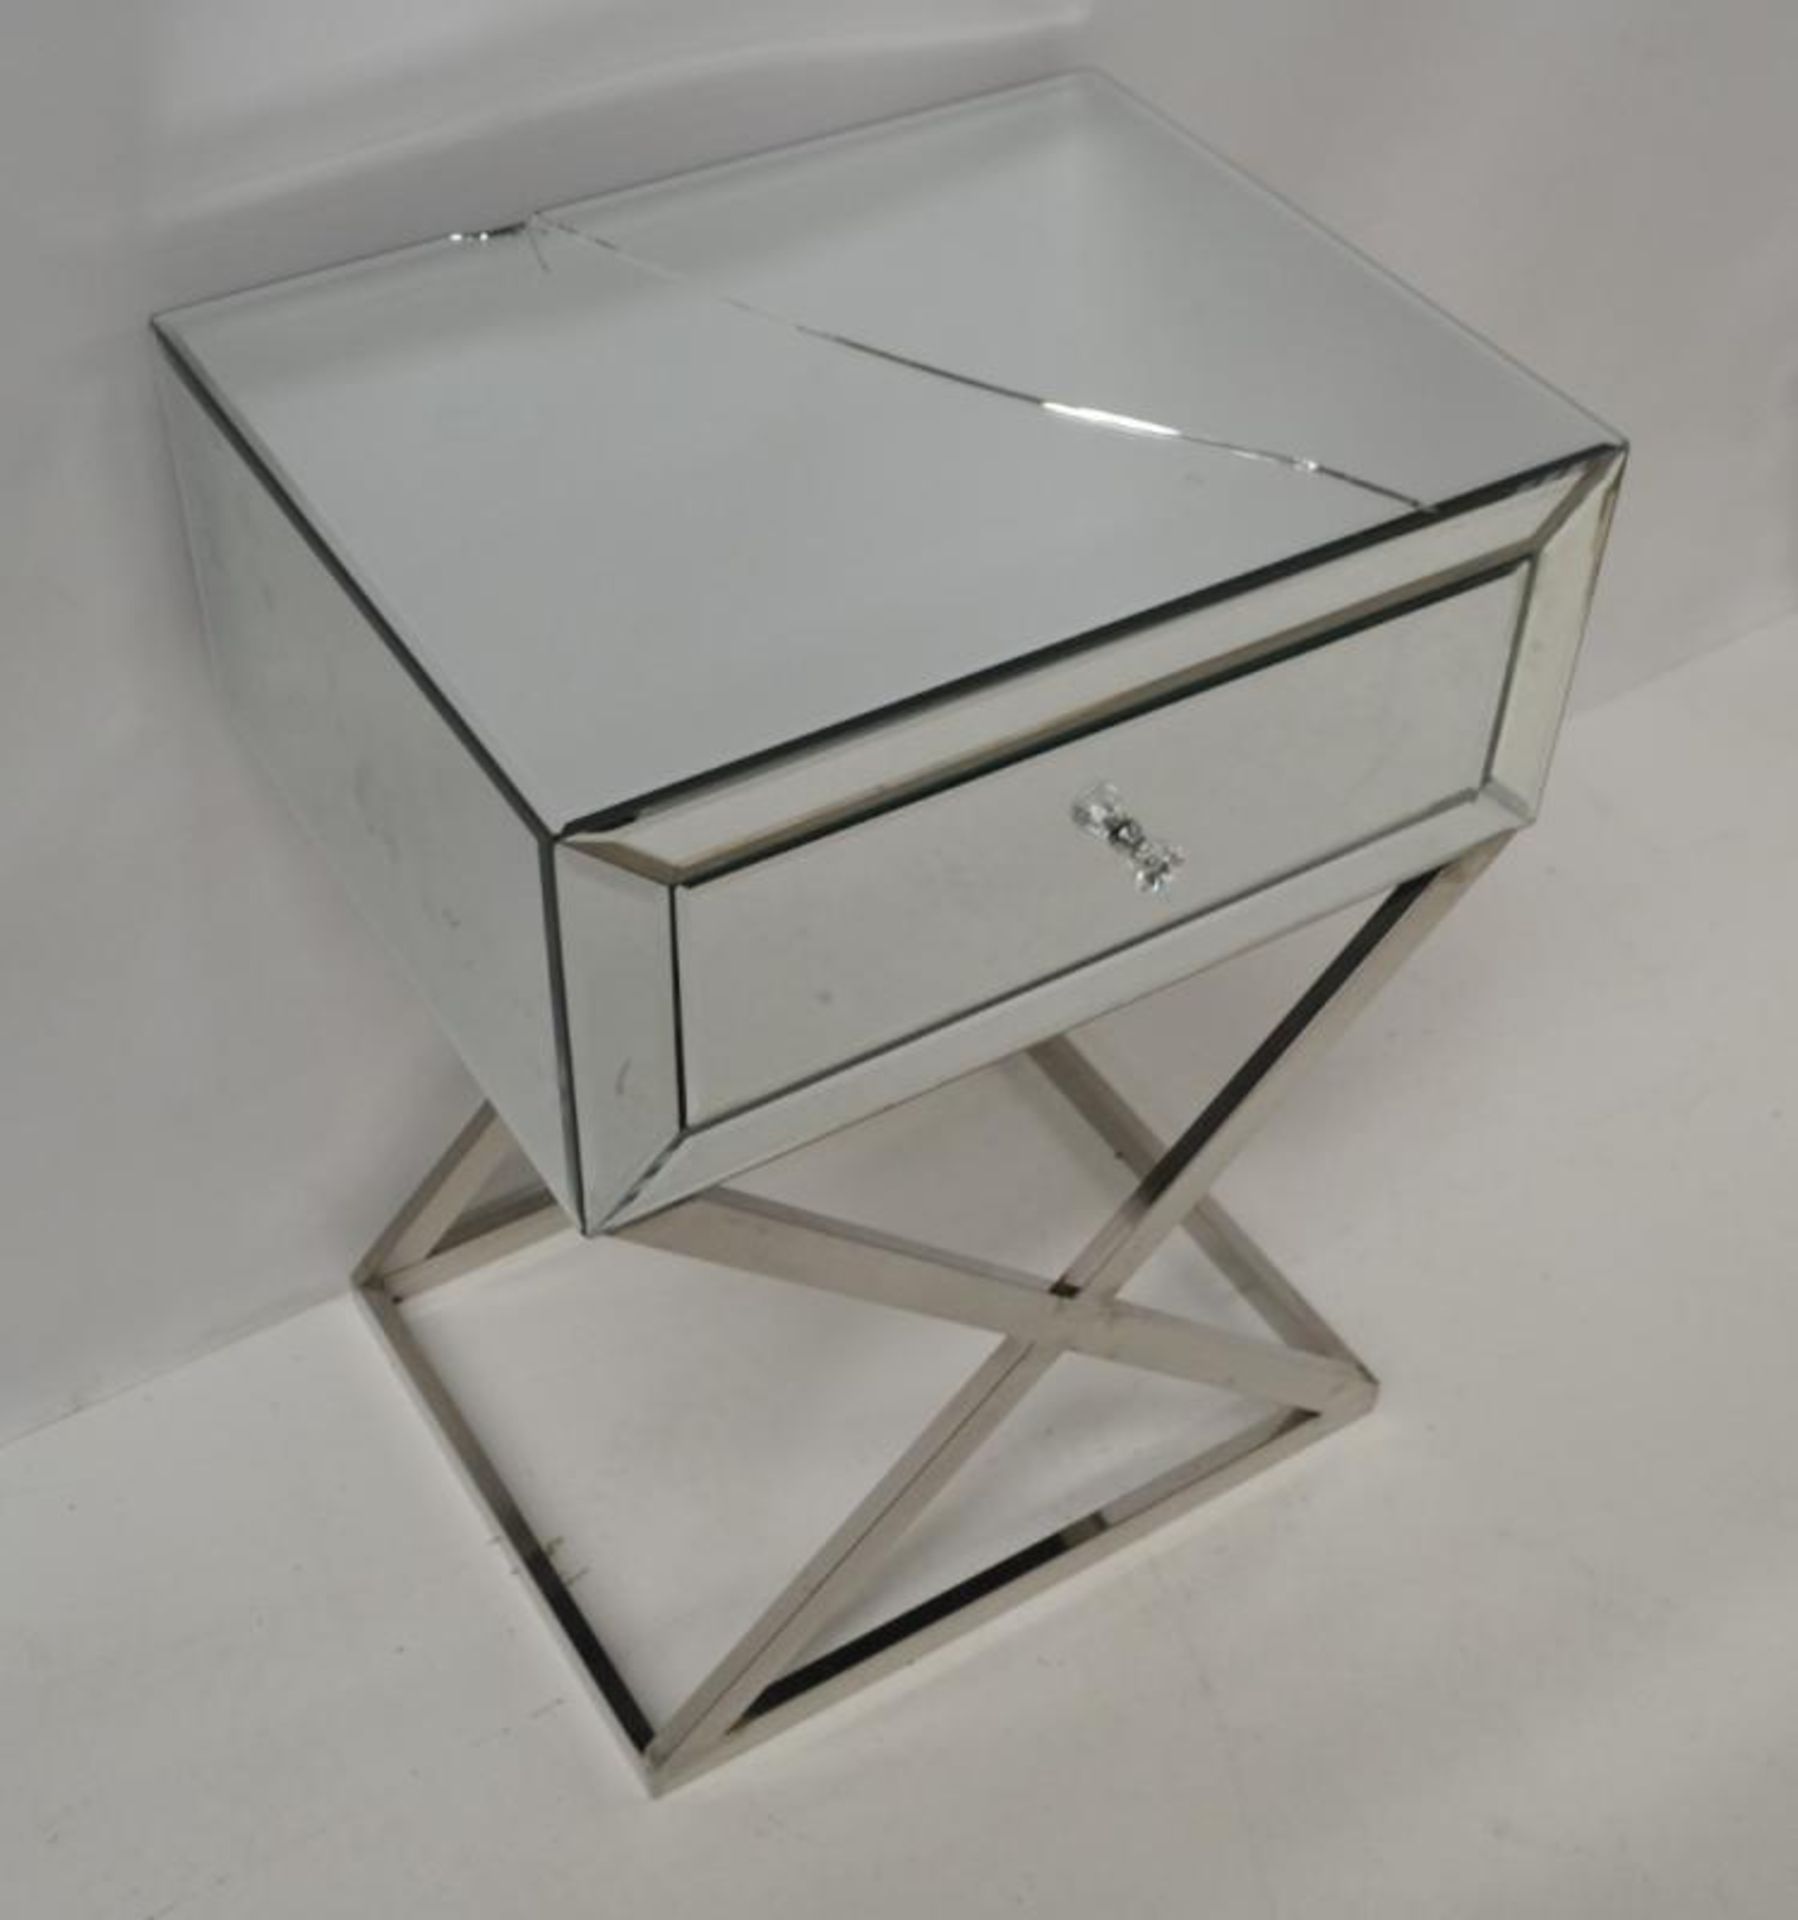 2 x Mirrored Glass Side Tables - Ref: BLT377 - CL380 - NO VAT - Location: Altrincham WA14 - Image 15 of 15